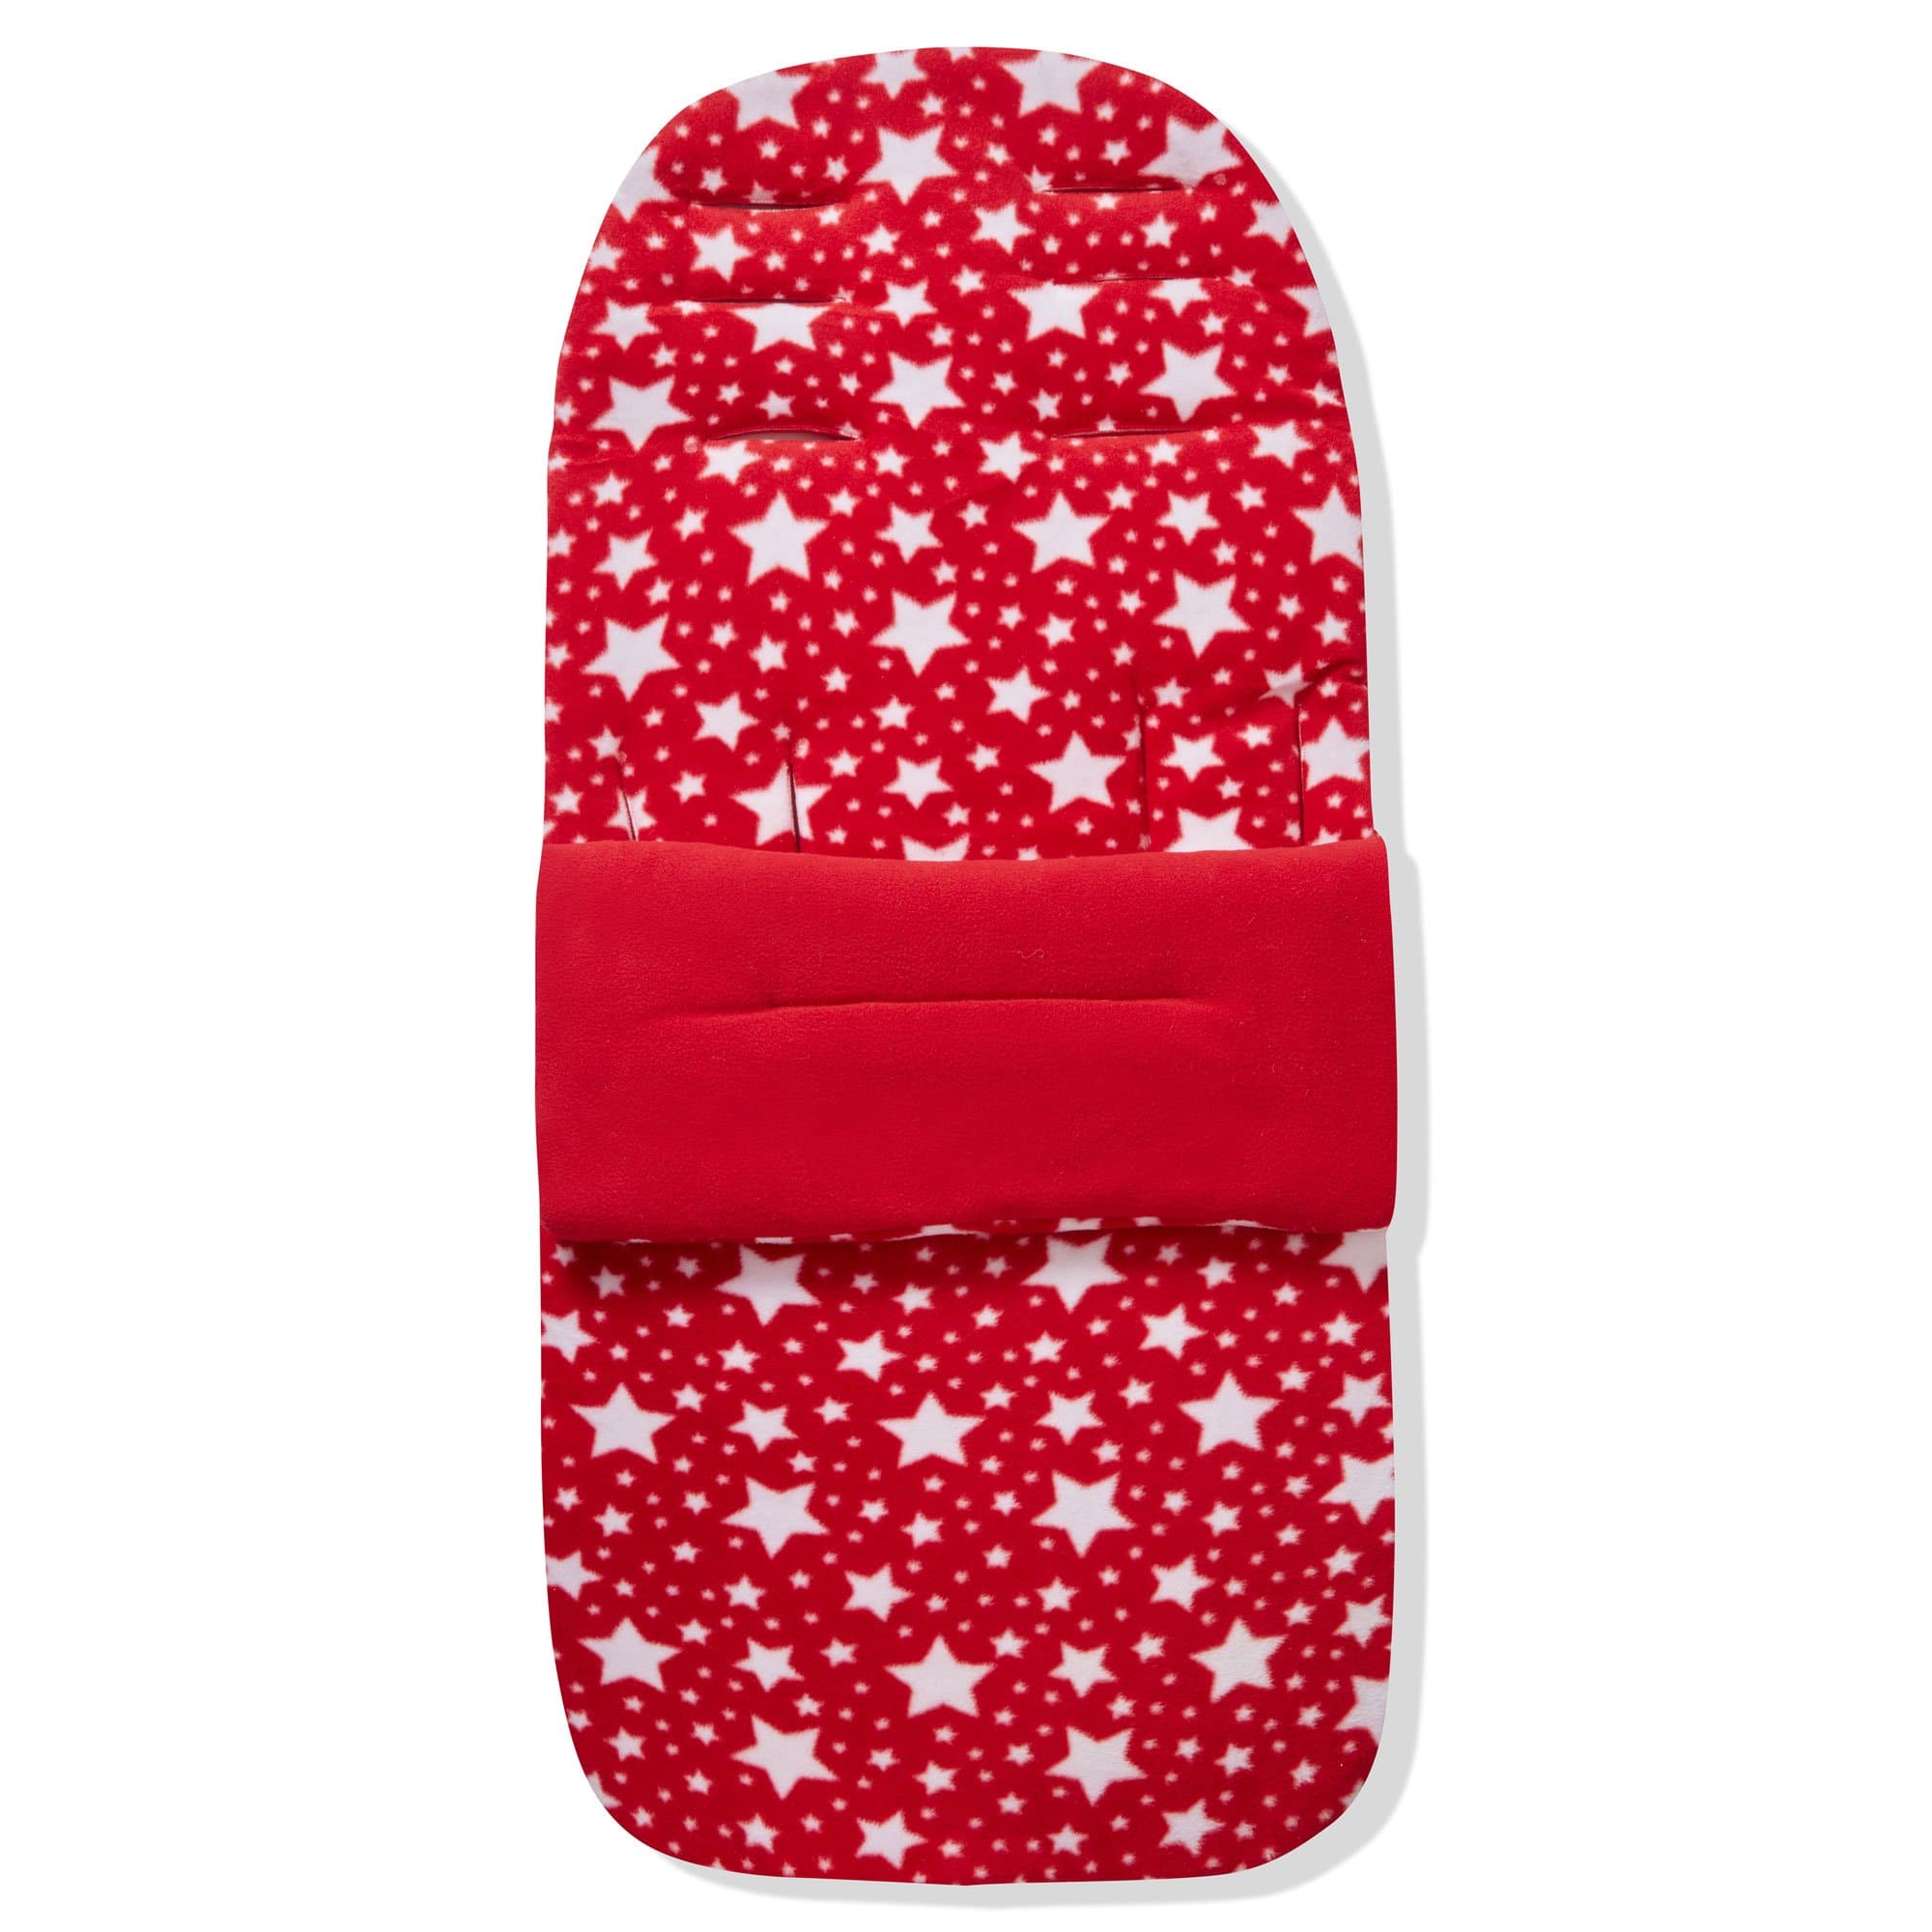 Fleece Footmuff / Cosy Toes Compatible with Valco - Red Star / Fits All Models | For Your Little One